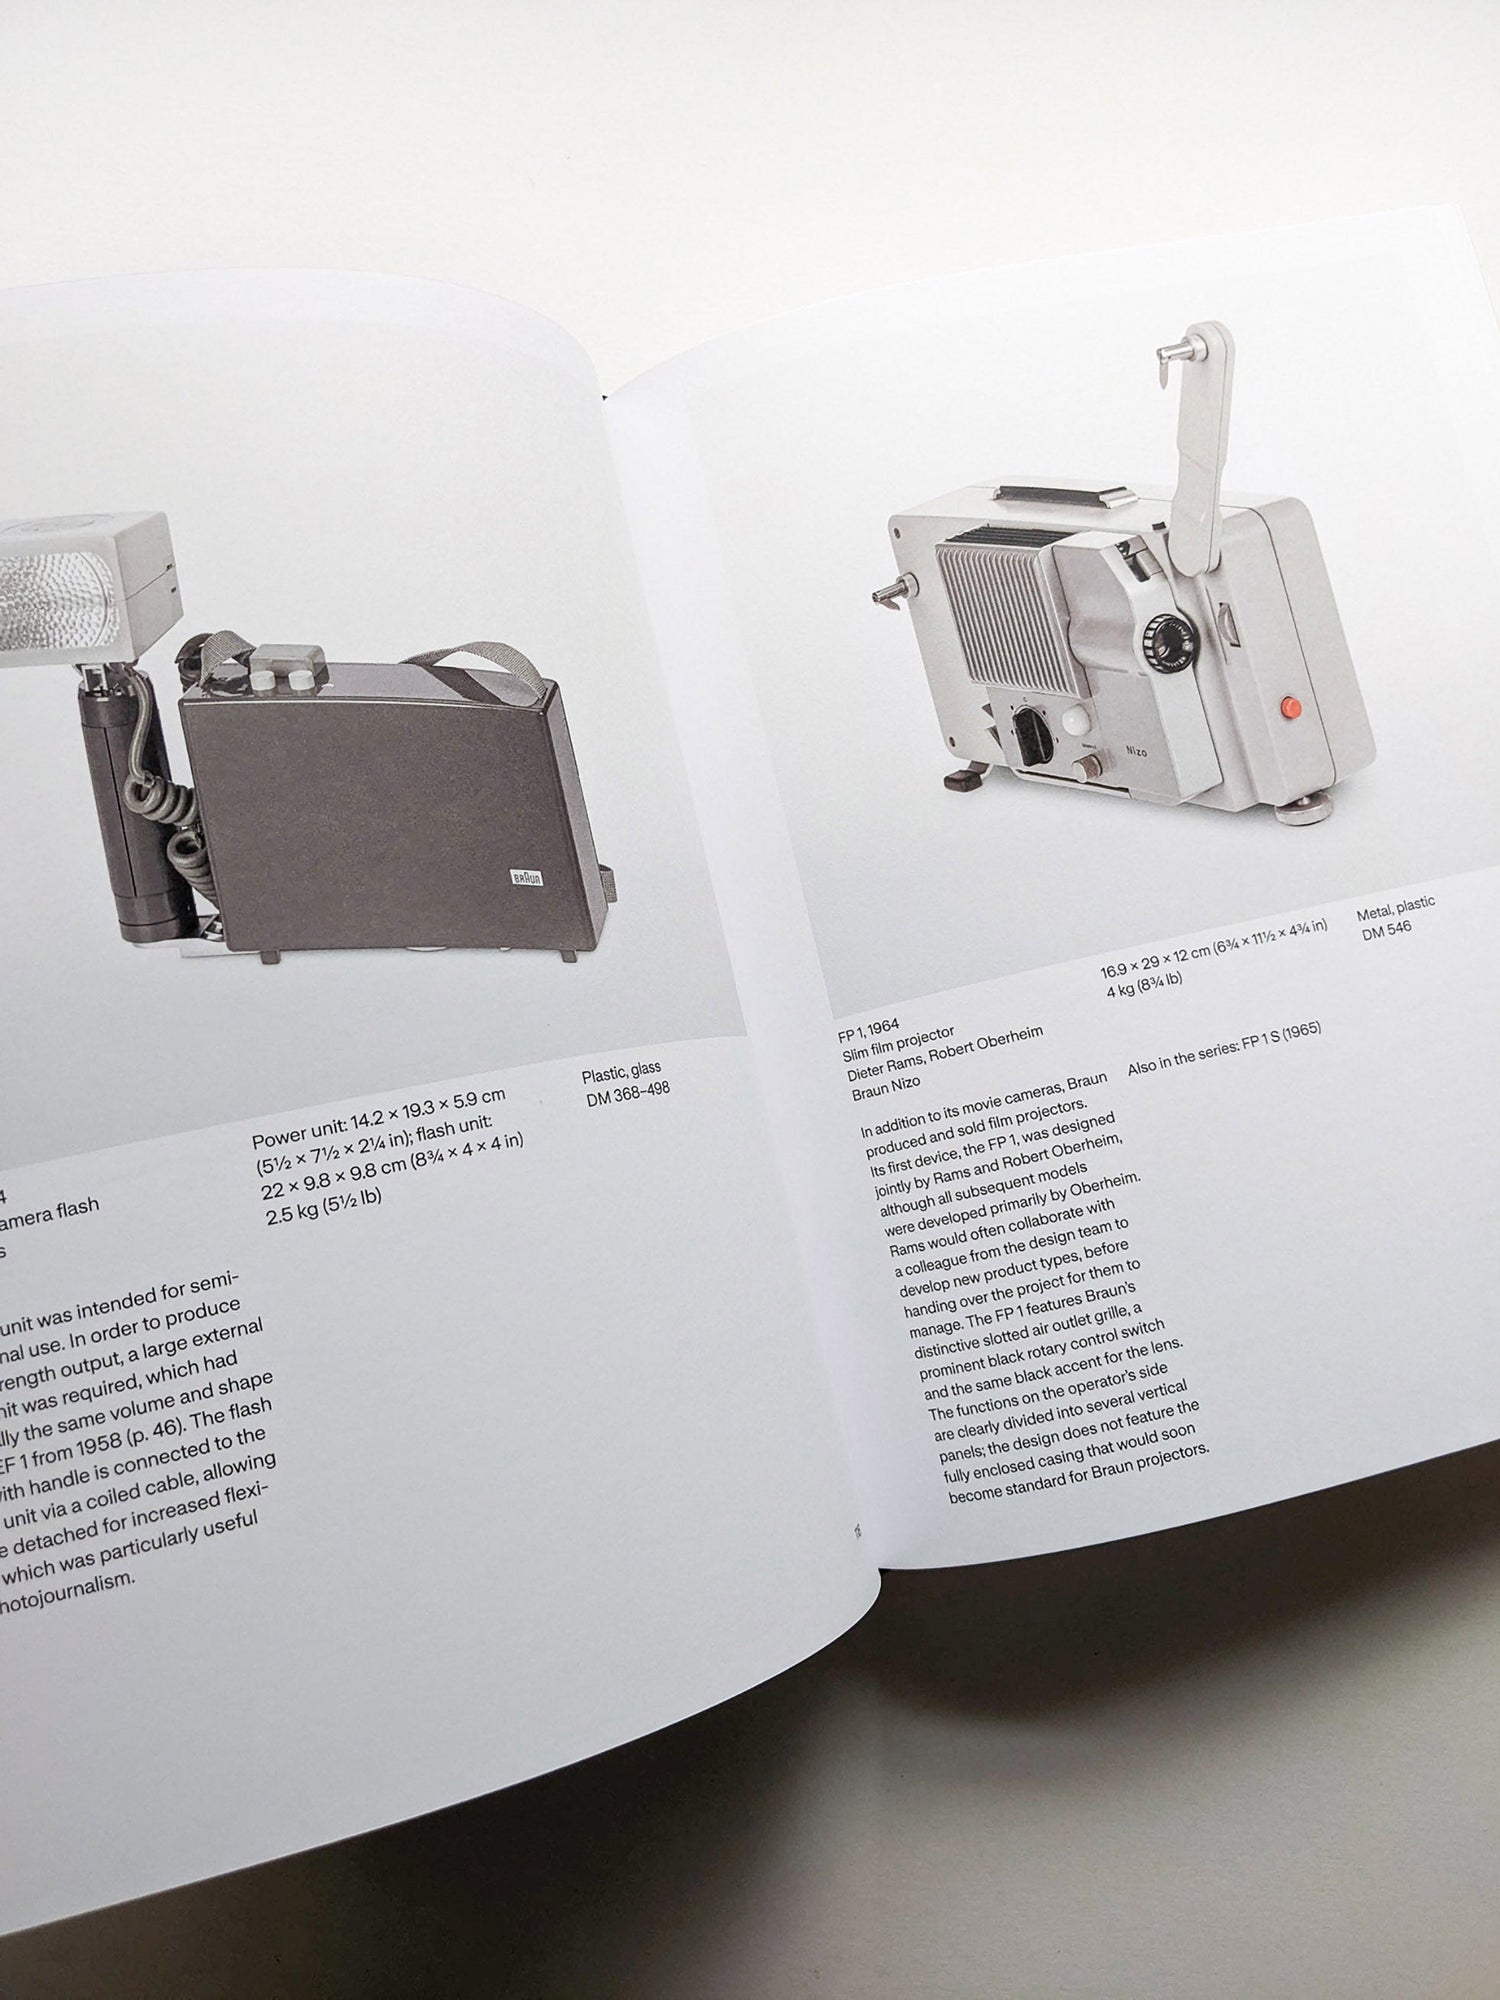 The Complete Works / Dieter Rams - 本 屋 青 旗 Ao-Hata Bookstore